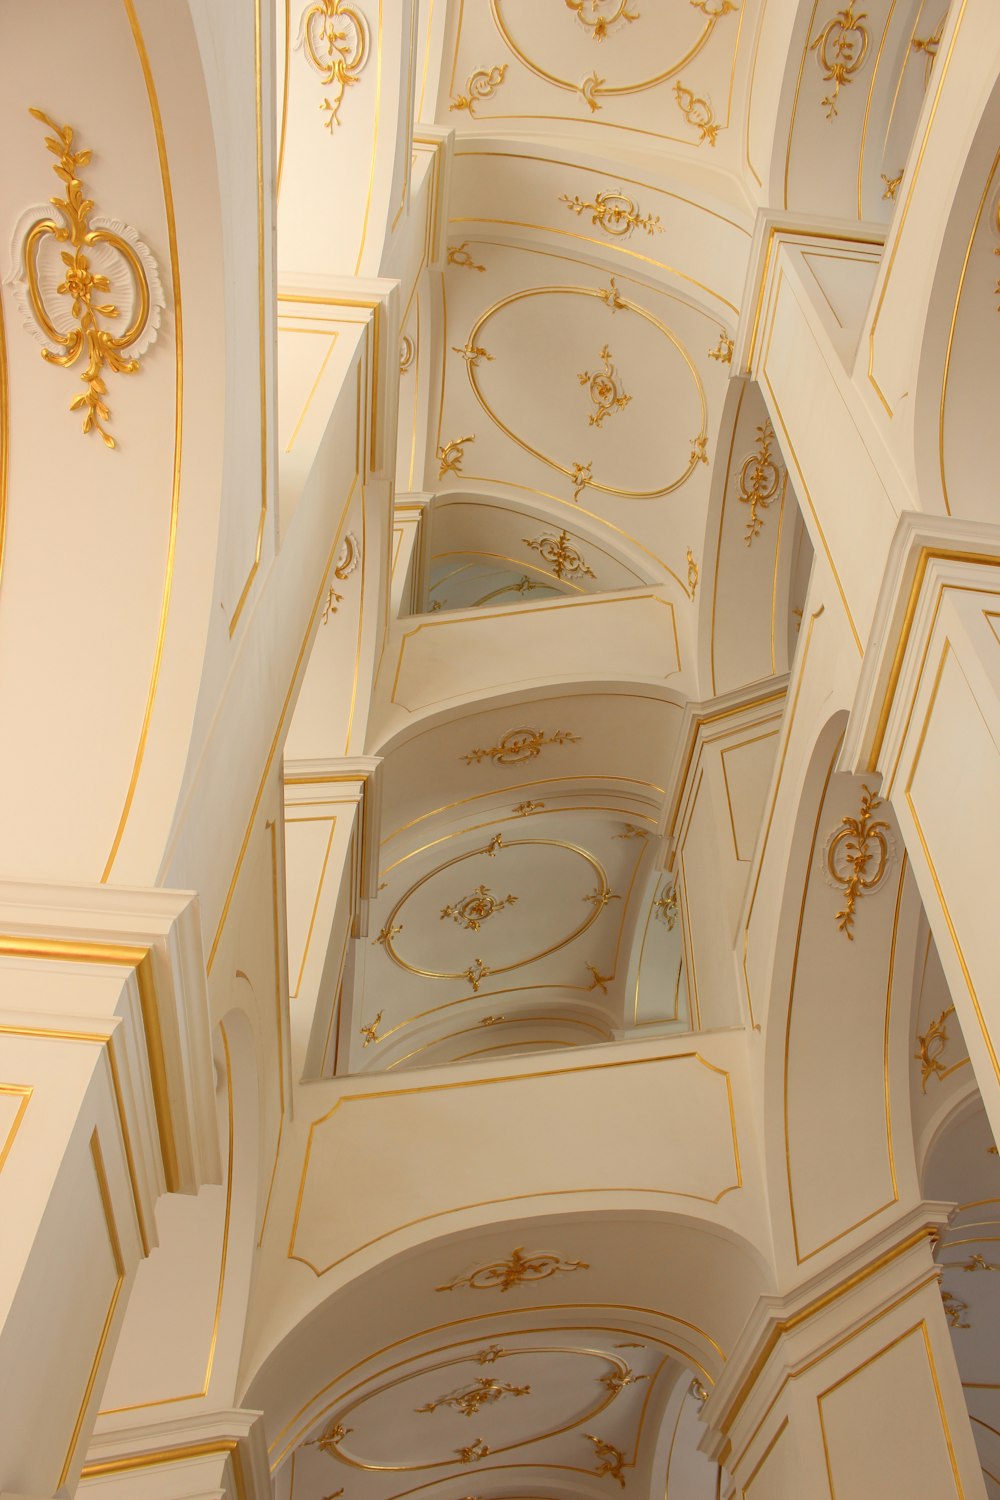 a ceiling with a design on it